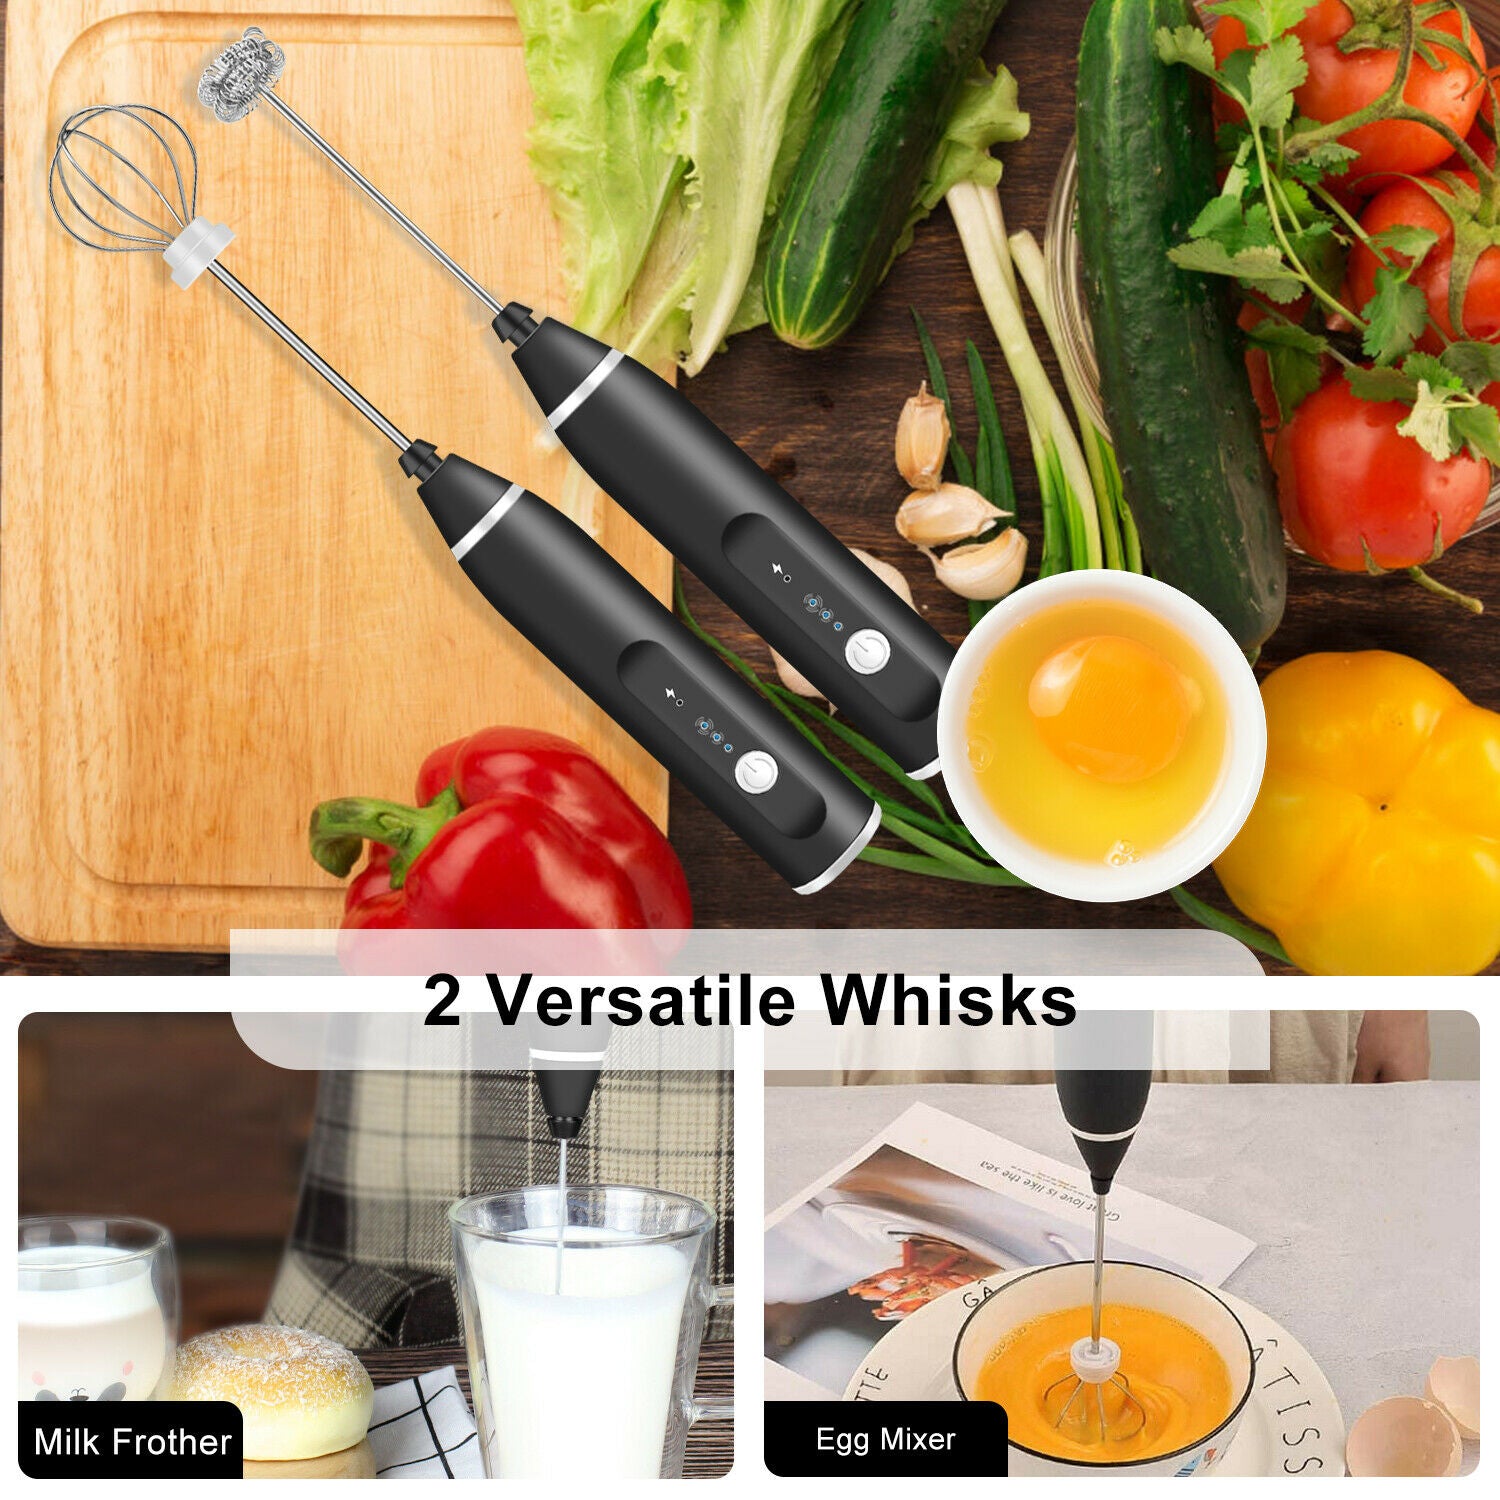 Cutie Cutlery Automatic Drink Dispenser Pump for Milk, Juice, Beverages.  Compact, Easy to Use, USB Rechargeable, Durable ABS, Silicone, Easy to  Clean.